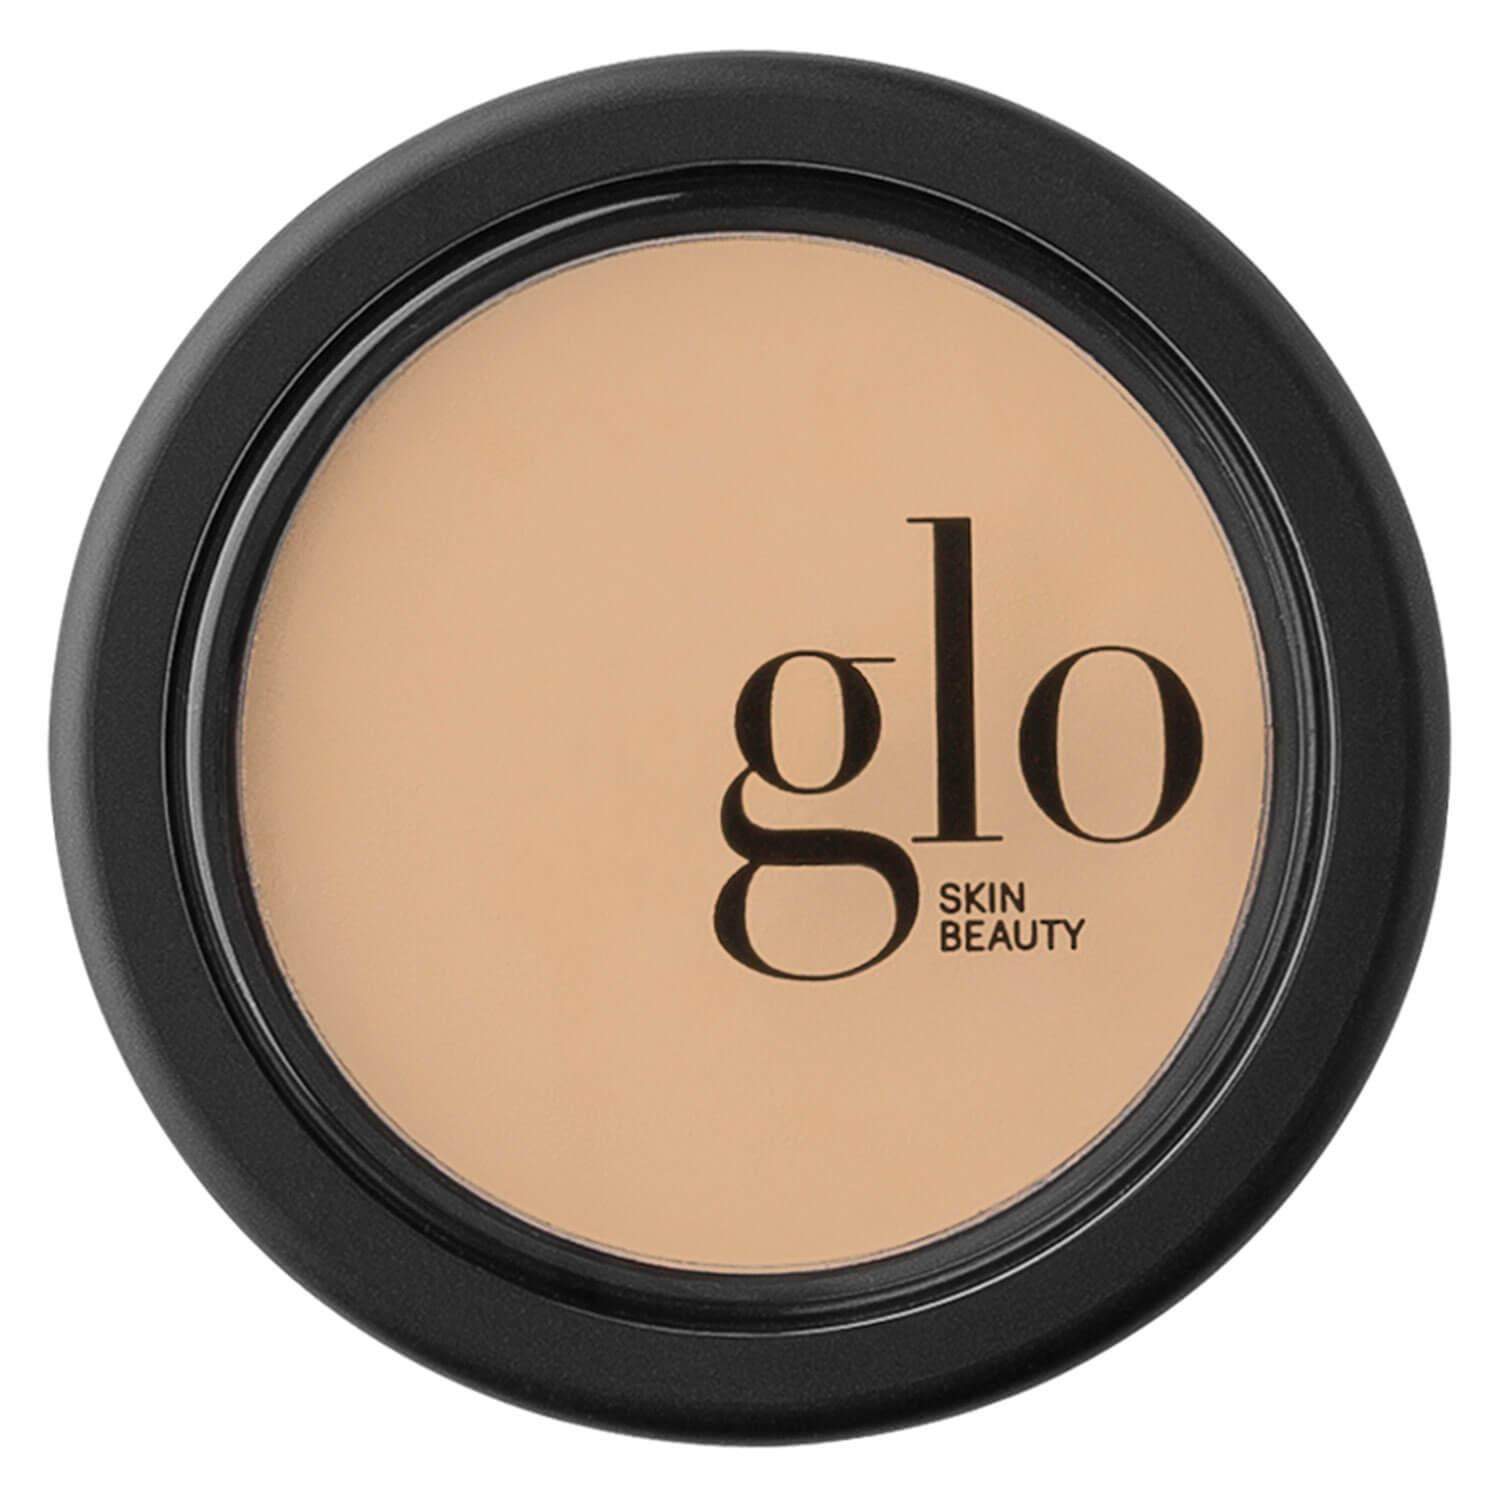 Glo Skin Beauty Camouflage - Oil Free Camouflage Natural